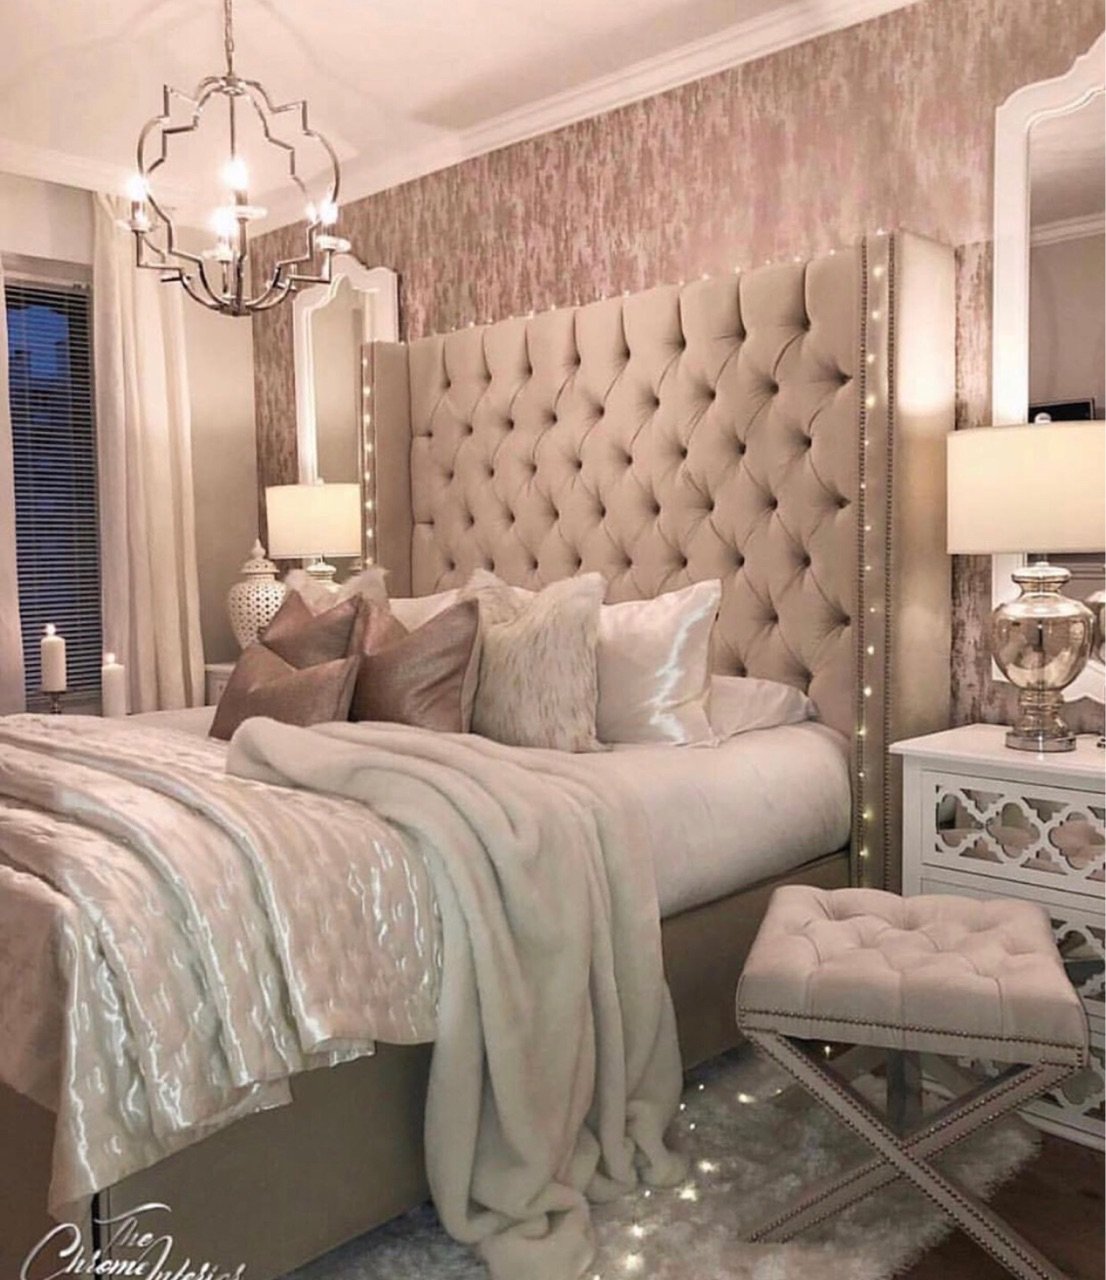 Girly Bedroom Designs you will fall in Love with